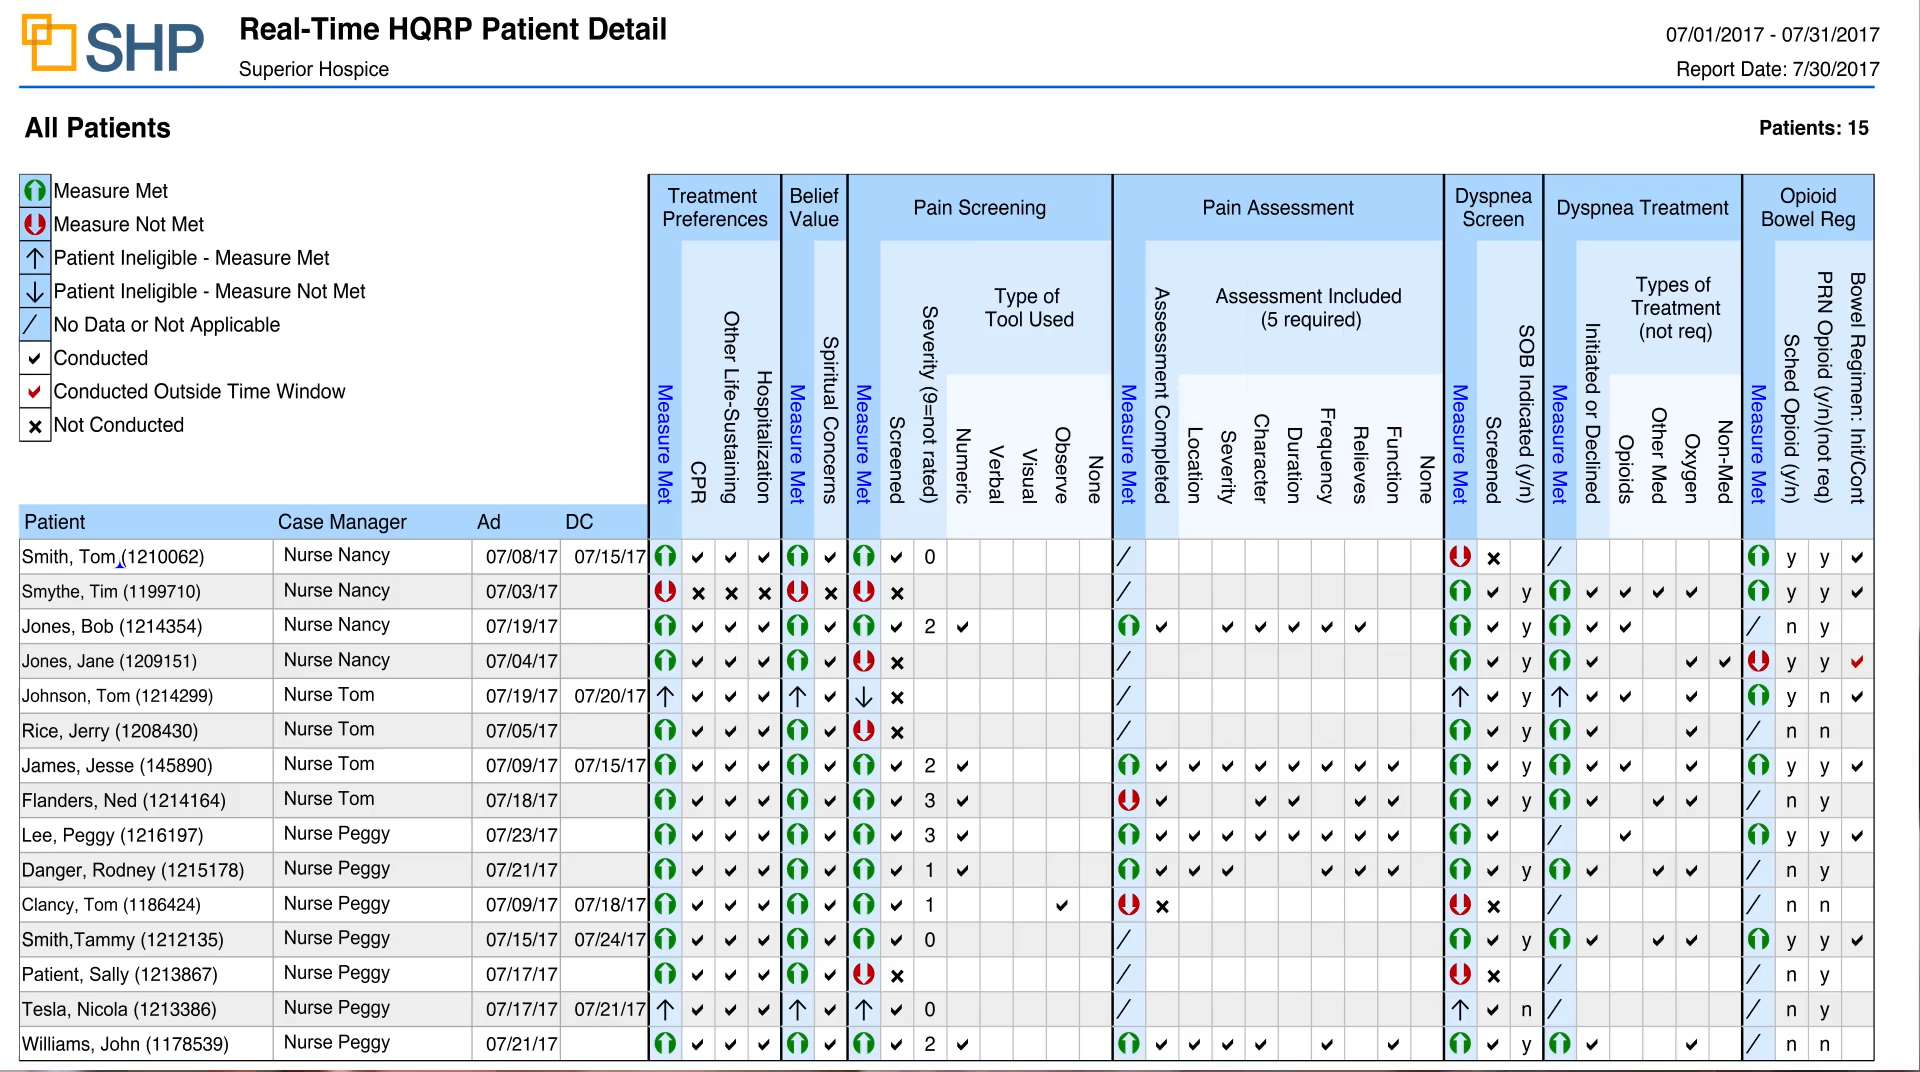 SHP for Hospice real-time HQRP patient detail